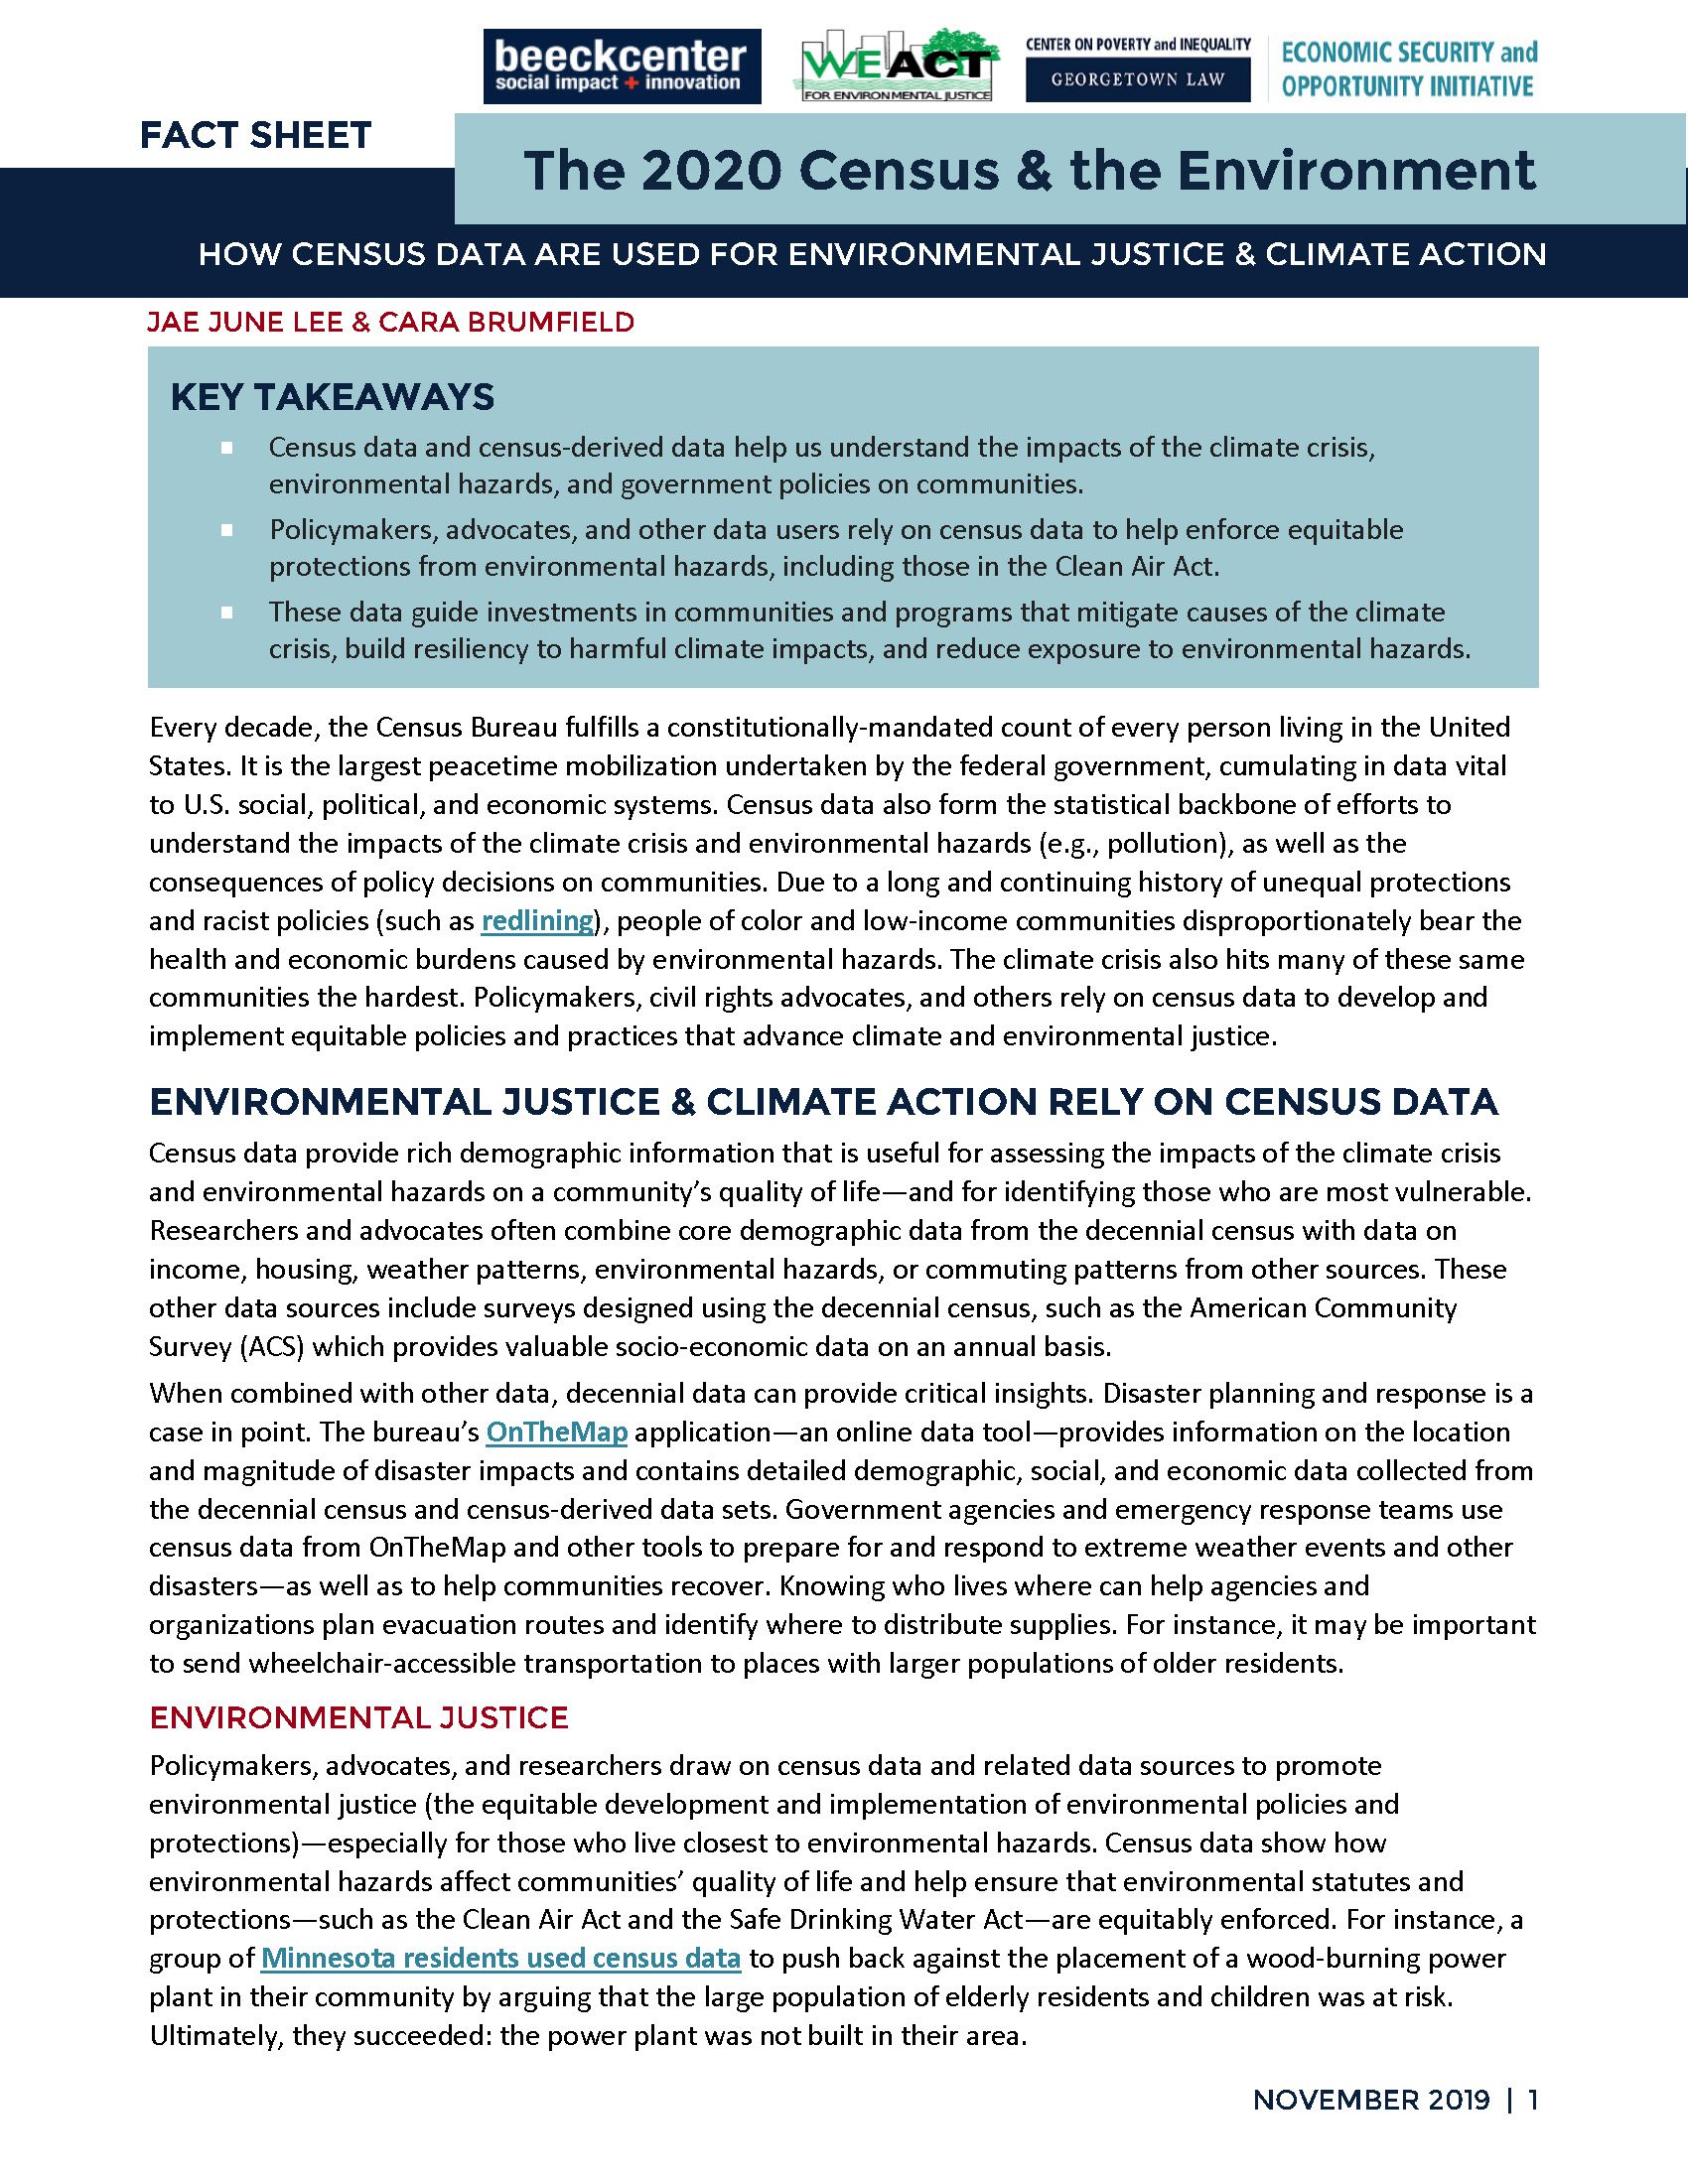 Cover of 2020 Census & the Environment Fact Sheet